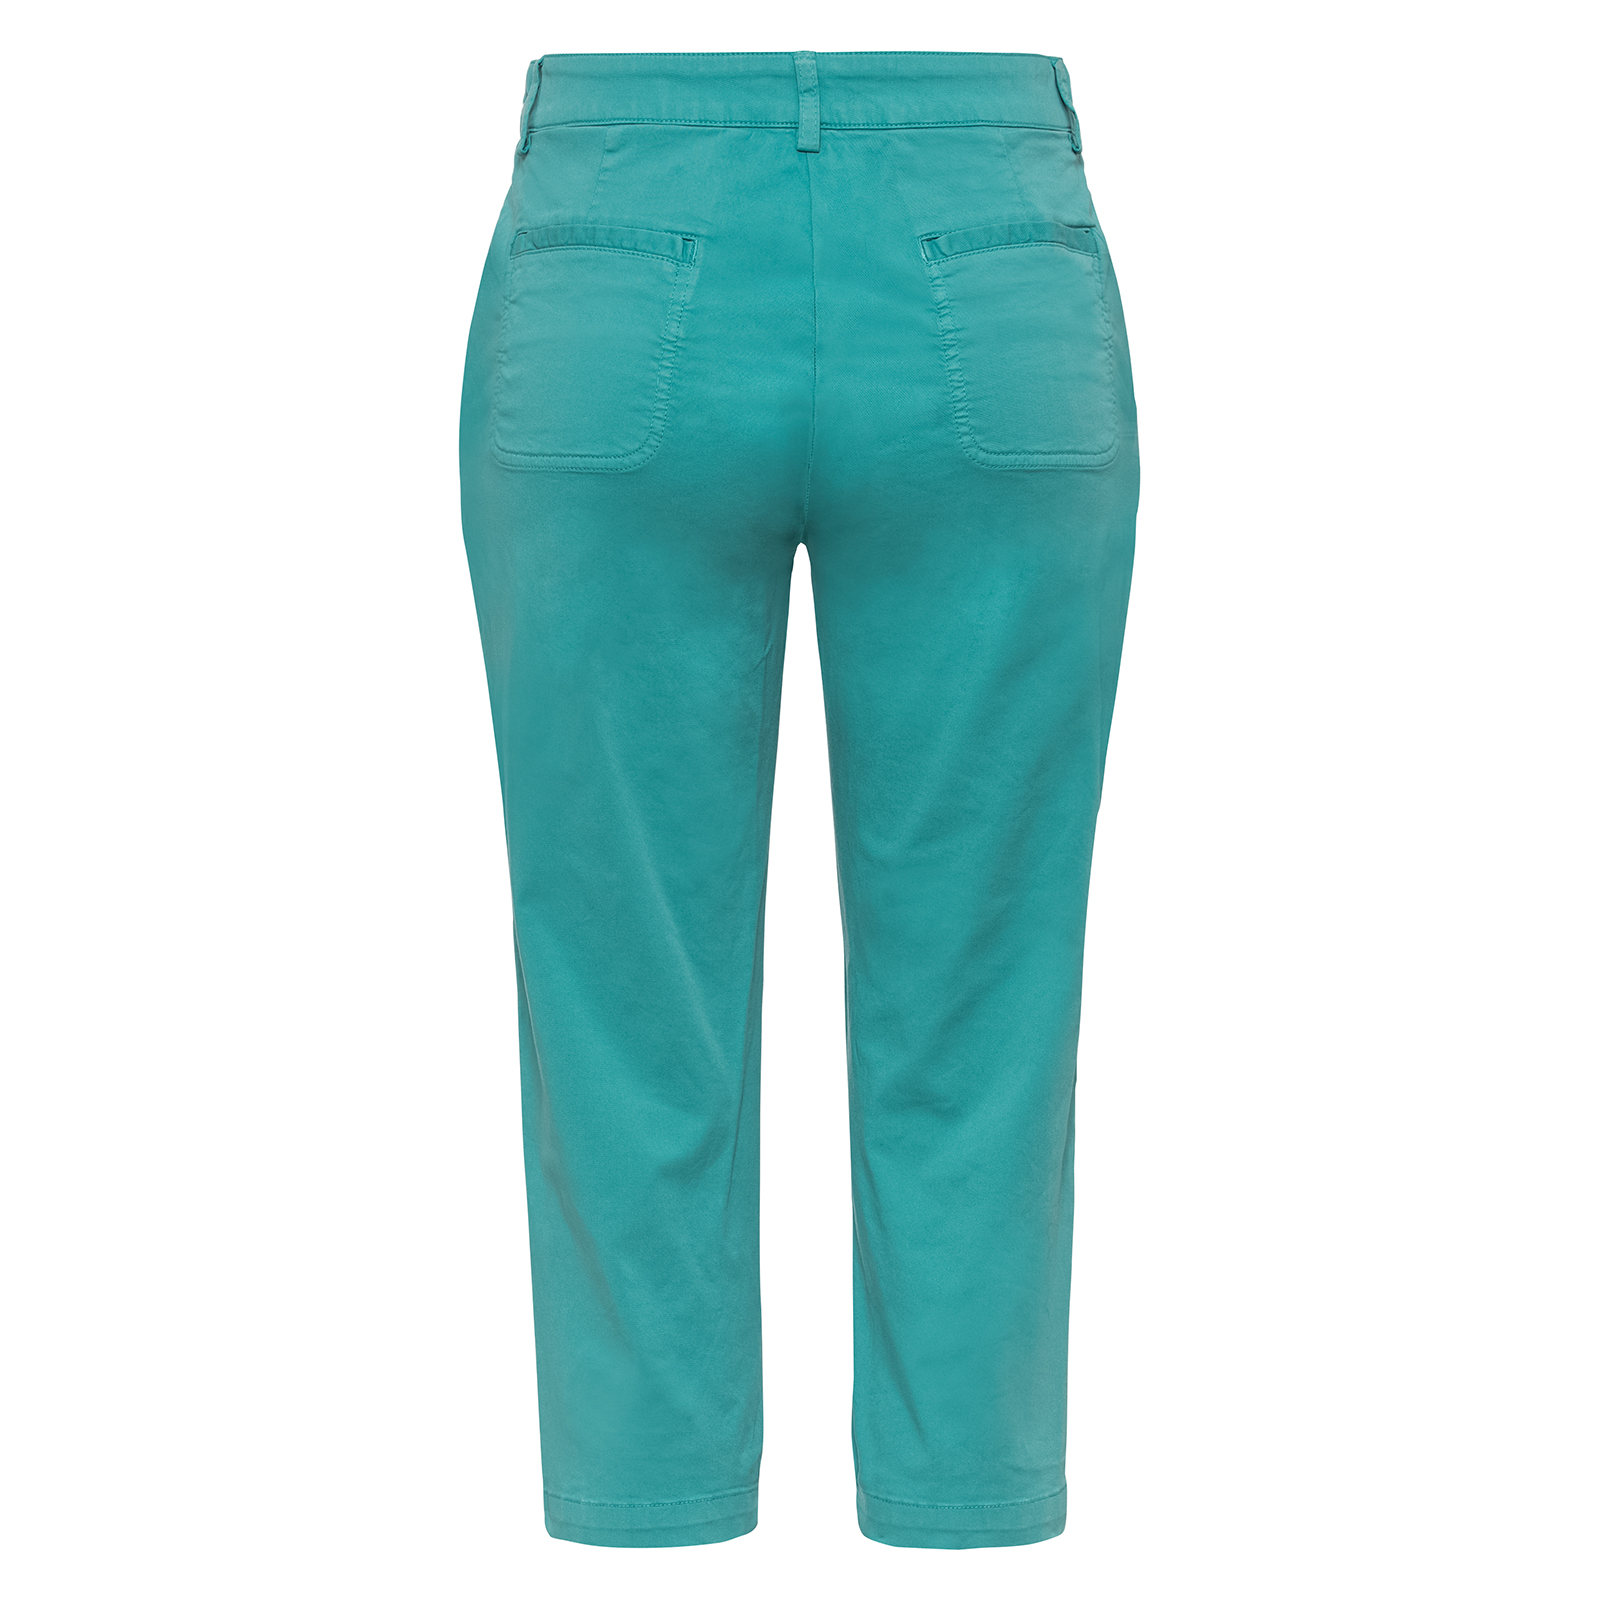 Comfortable ladies' capri-style trousers with stretch function